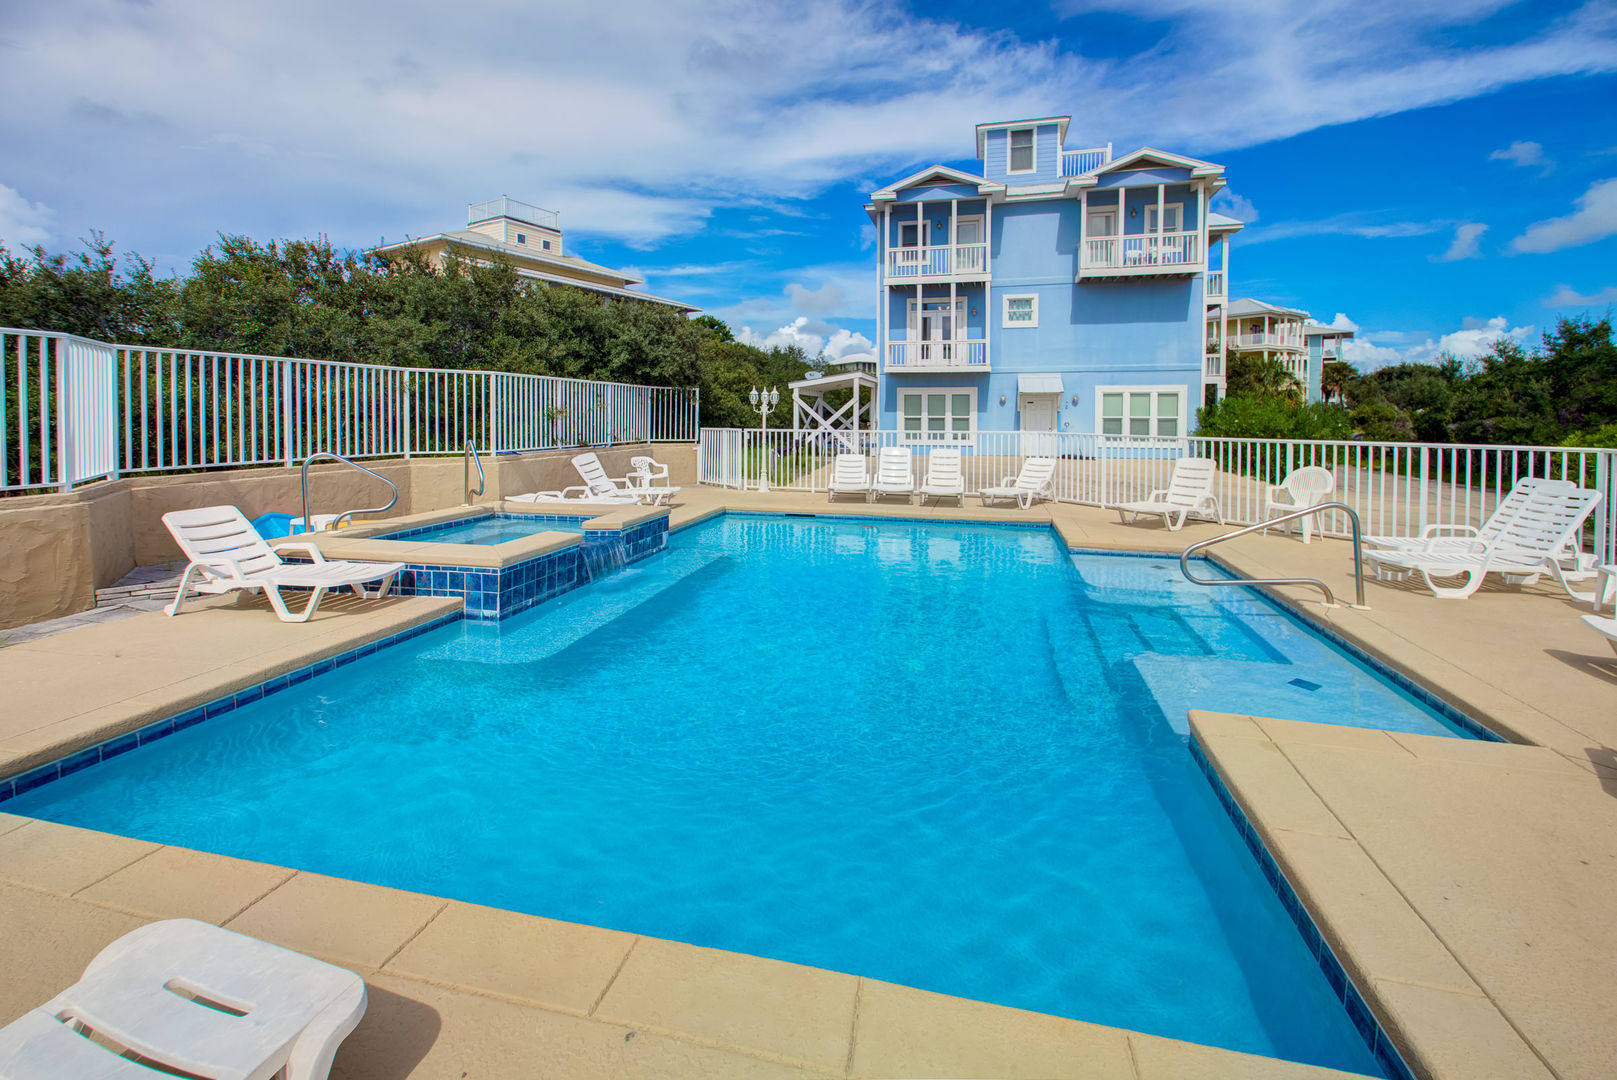 Pool and Vacation Rental to Work From Home in Gulf Shores